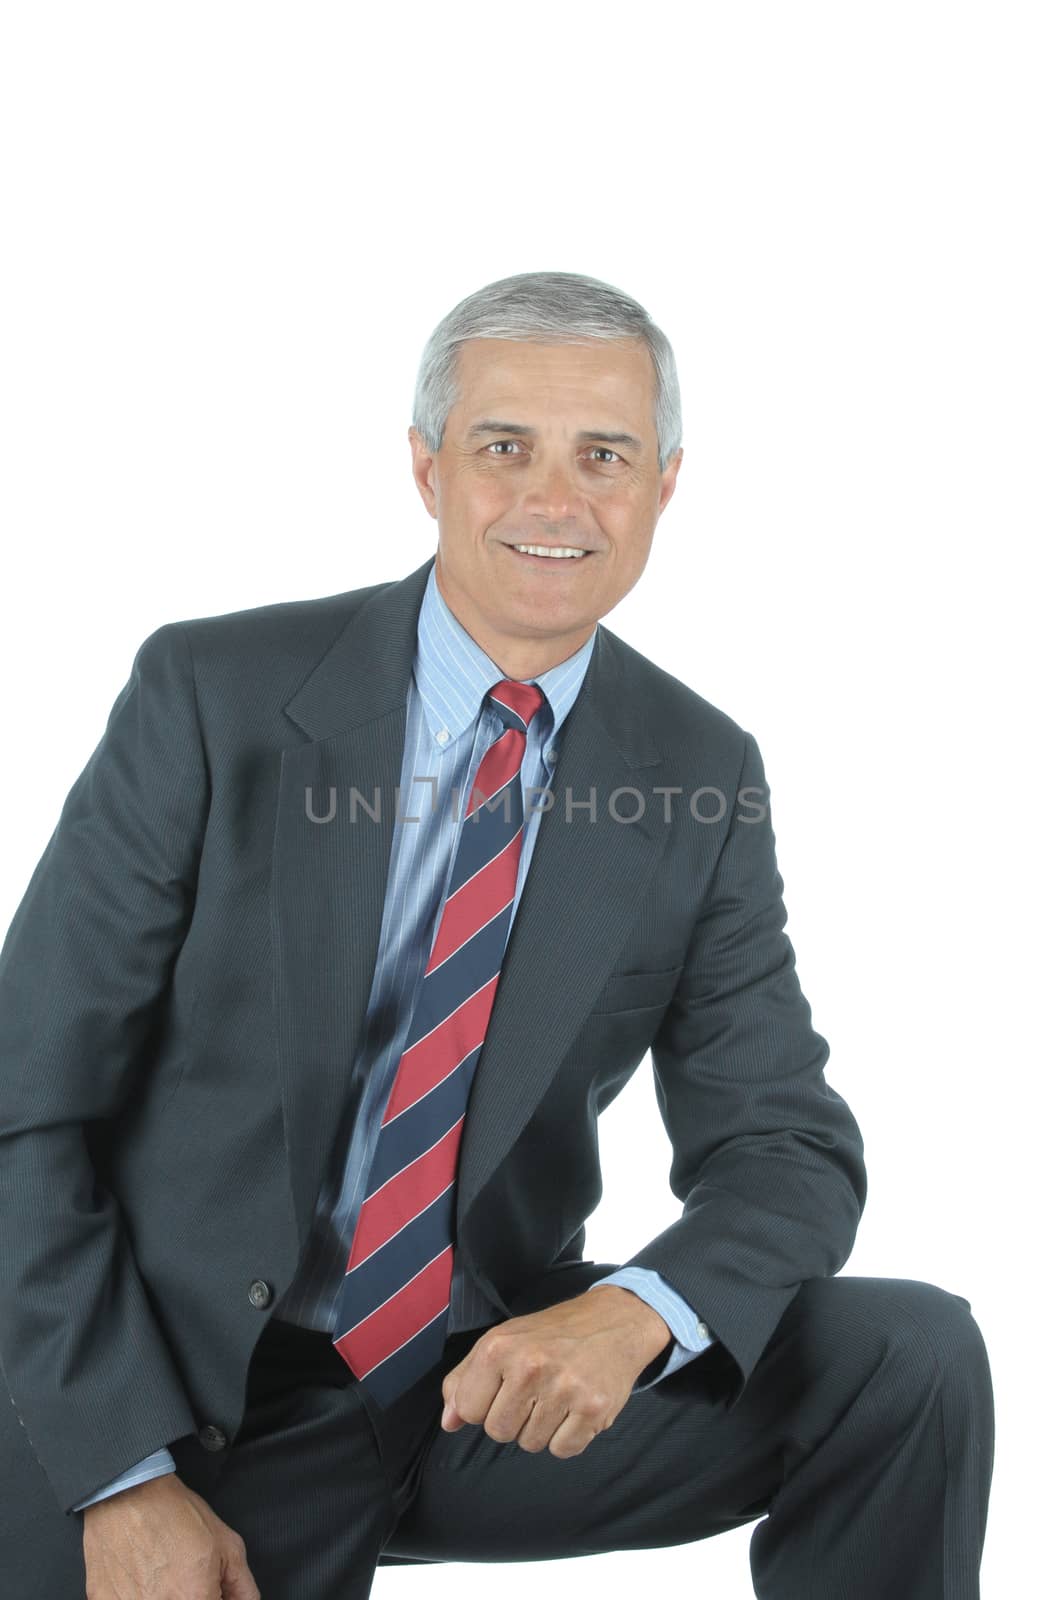 Smiling Businessman leaning on one knee by sCukrov